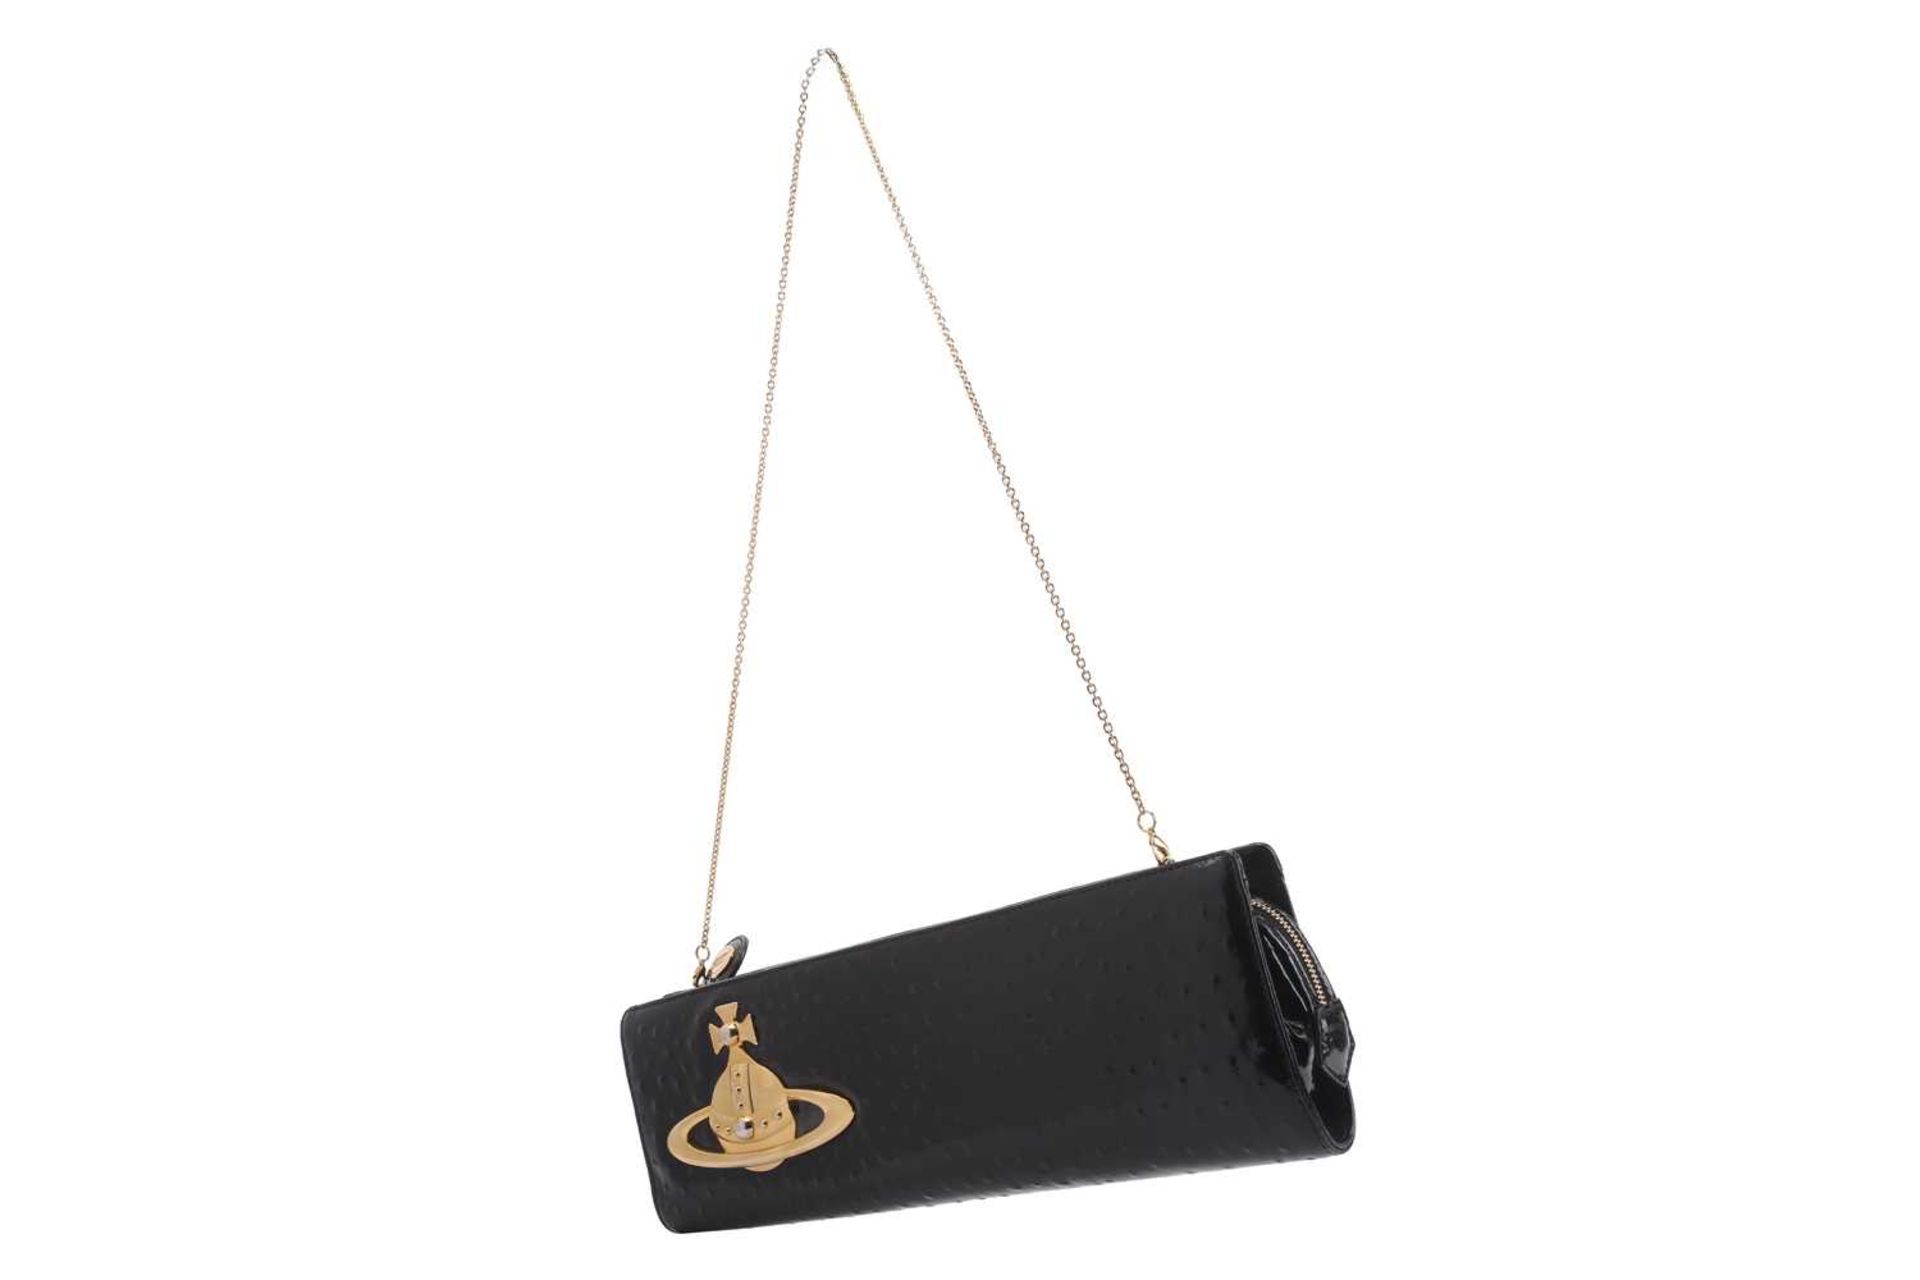 Vivienne Westwood - an extra long clutch in black patent mock ostrich leather, embellished with - Image 2 of 7